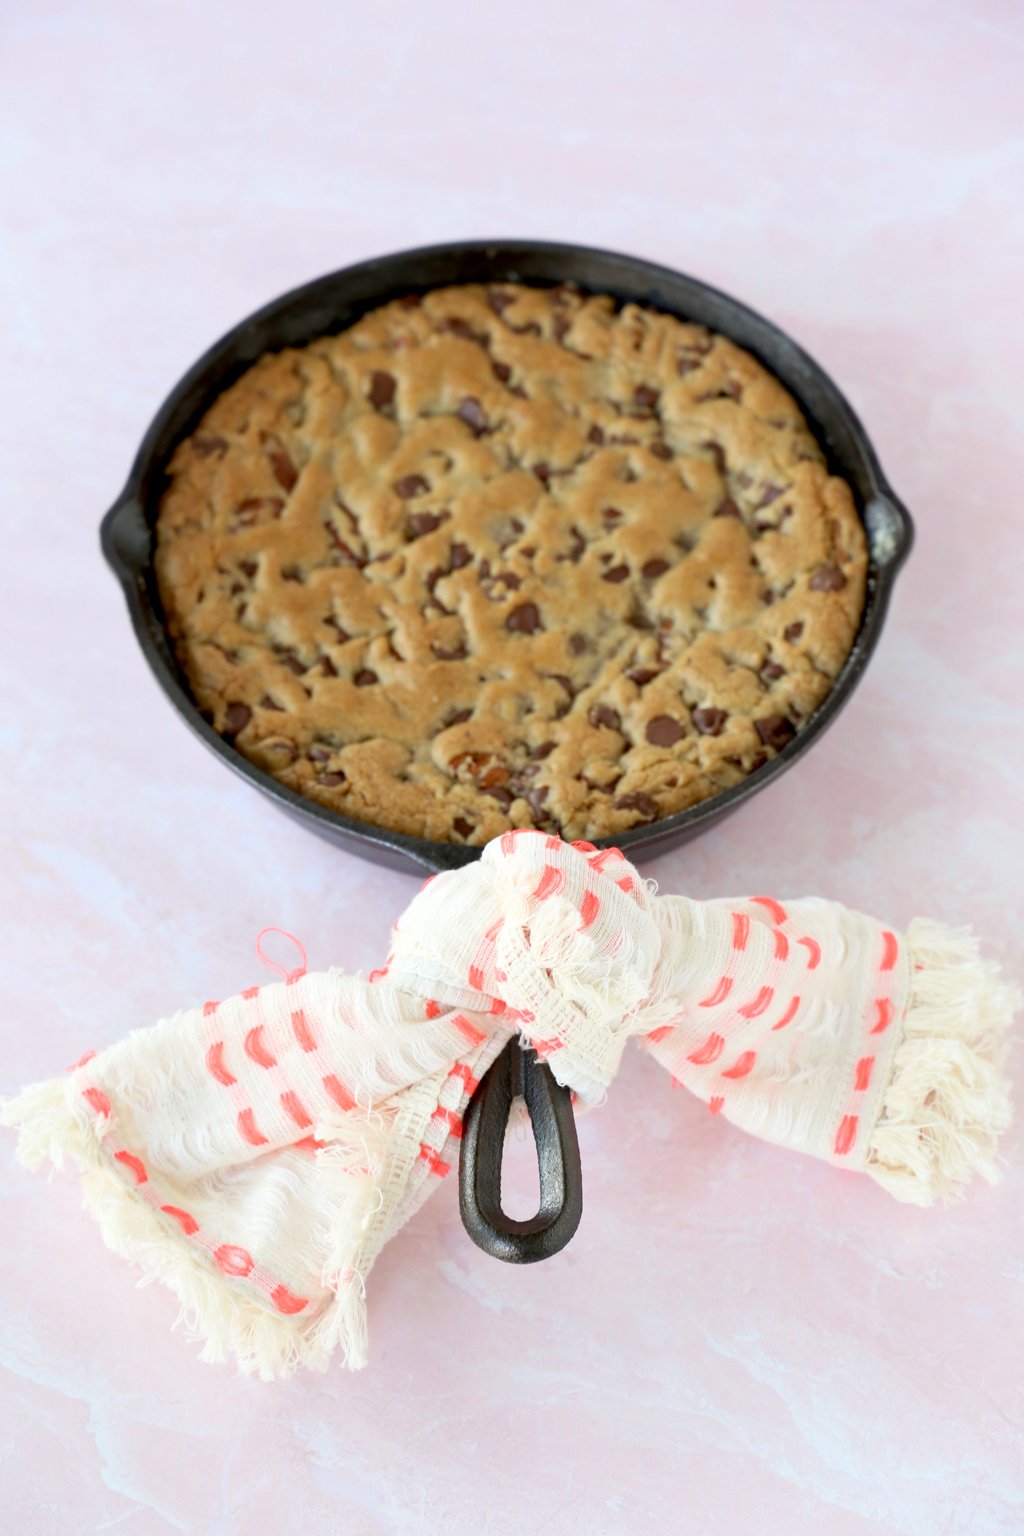 Browned Butter cast Iron Chocolate Chip Cookie